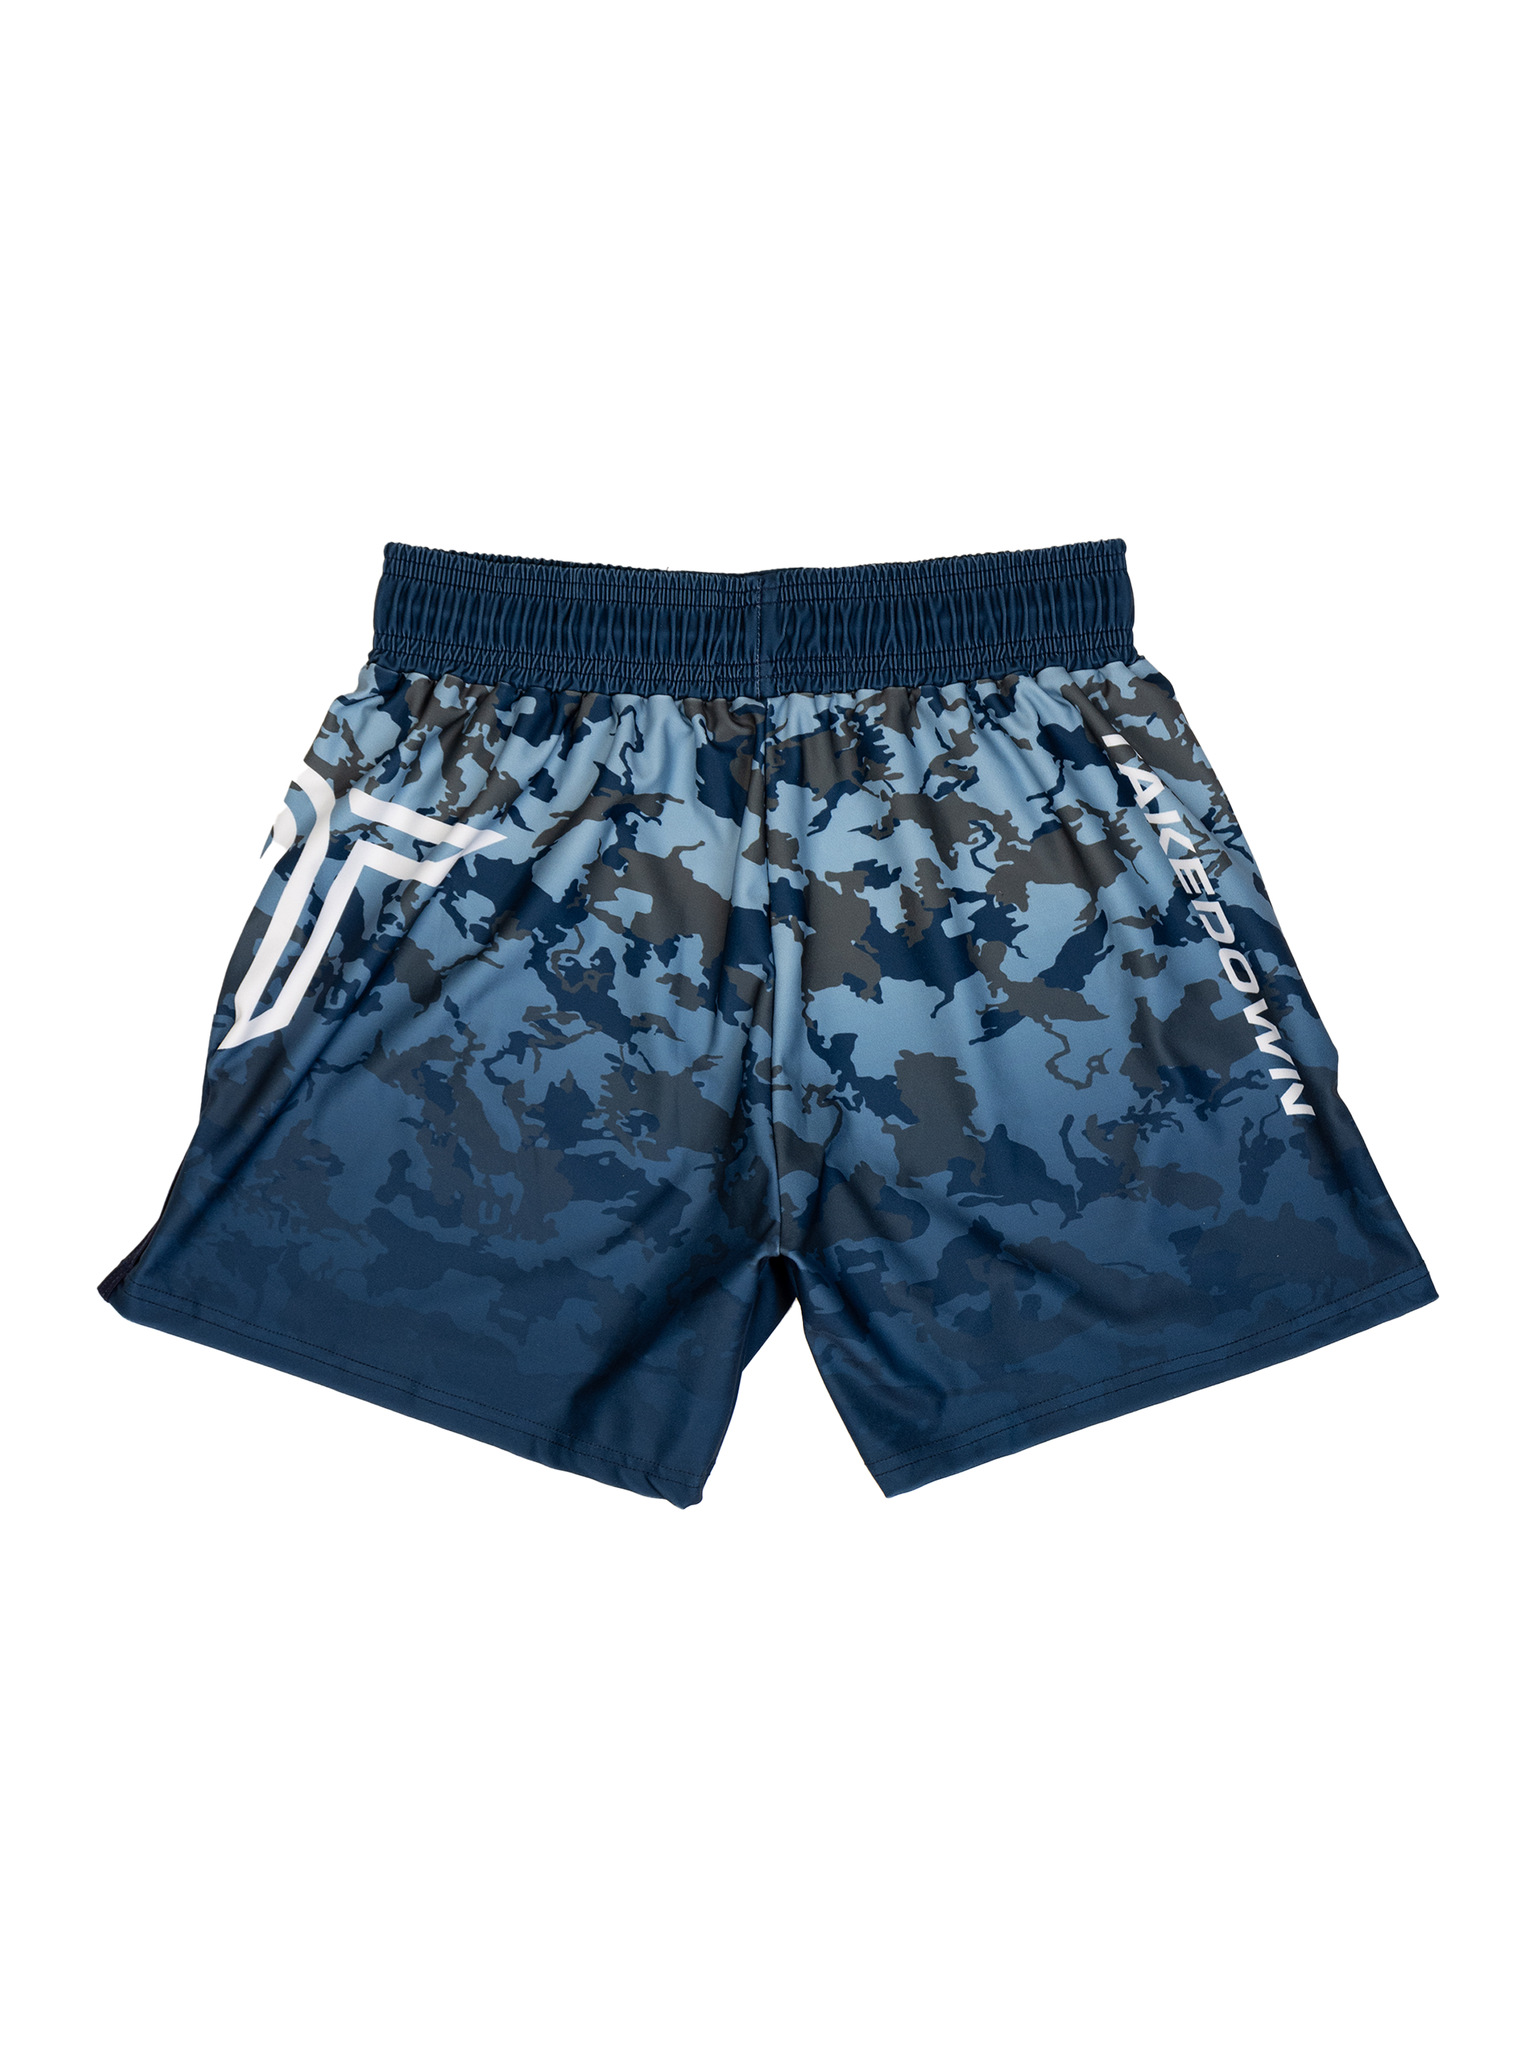 Particle Camo Fight Shorts - Ink (5"&7" Inseam)